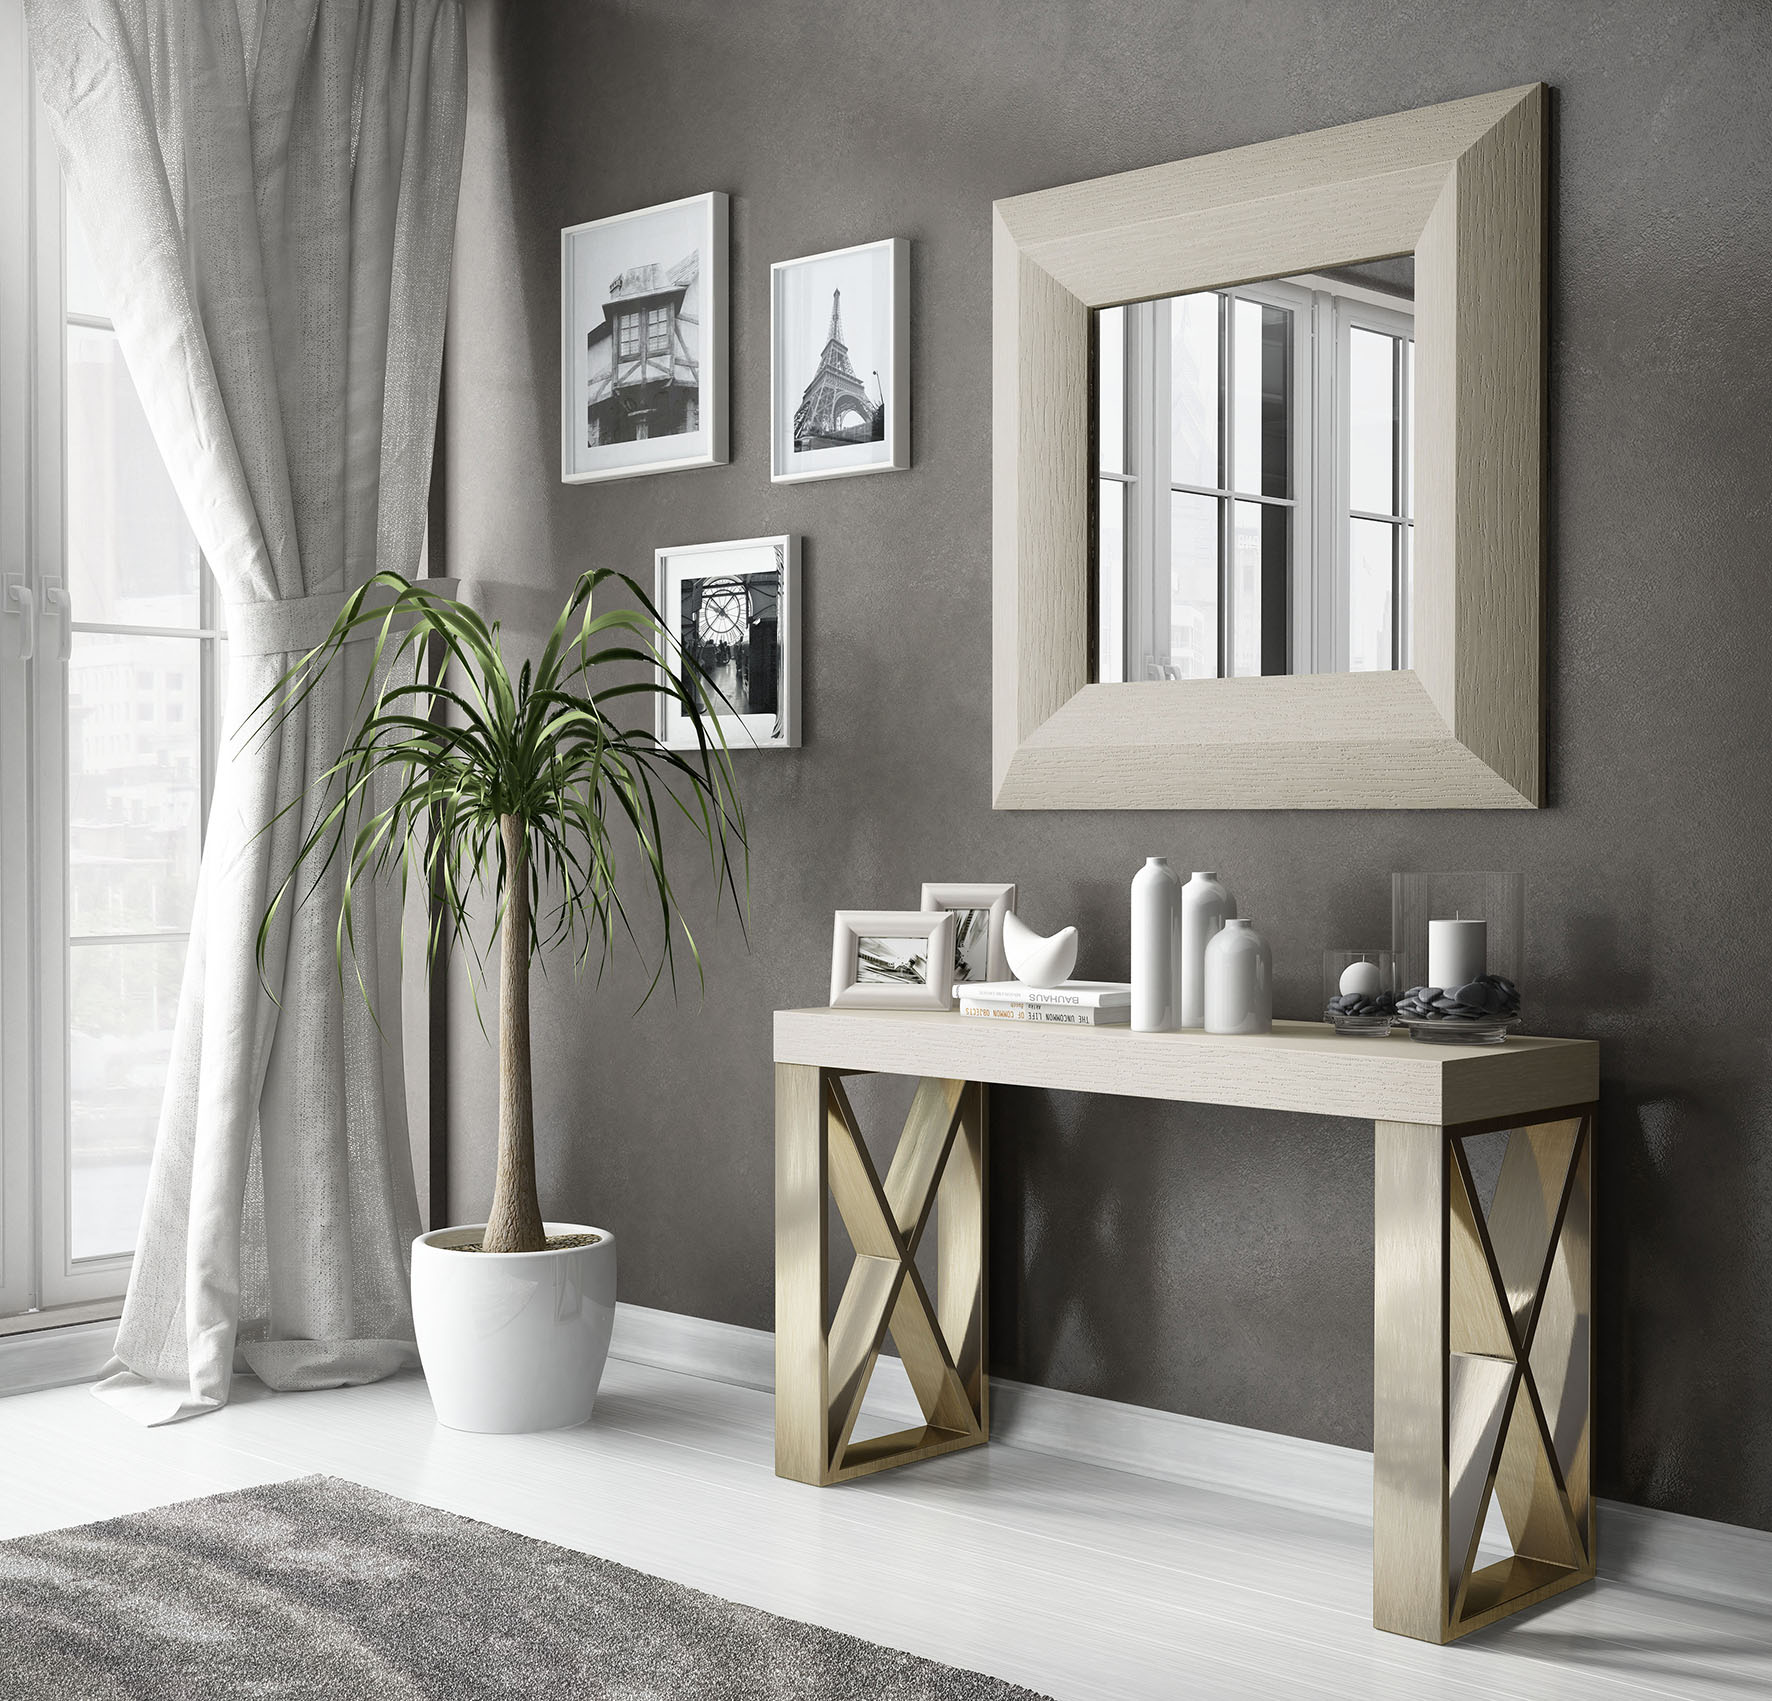 Brands Franco Kora Dining and Wall Units, Spain CII.40 Console Table